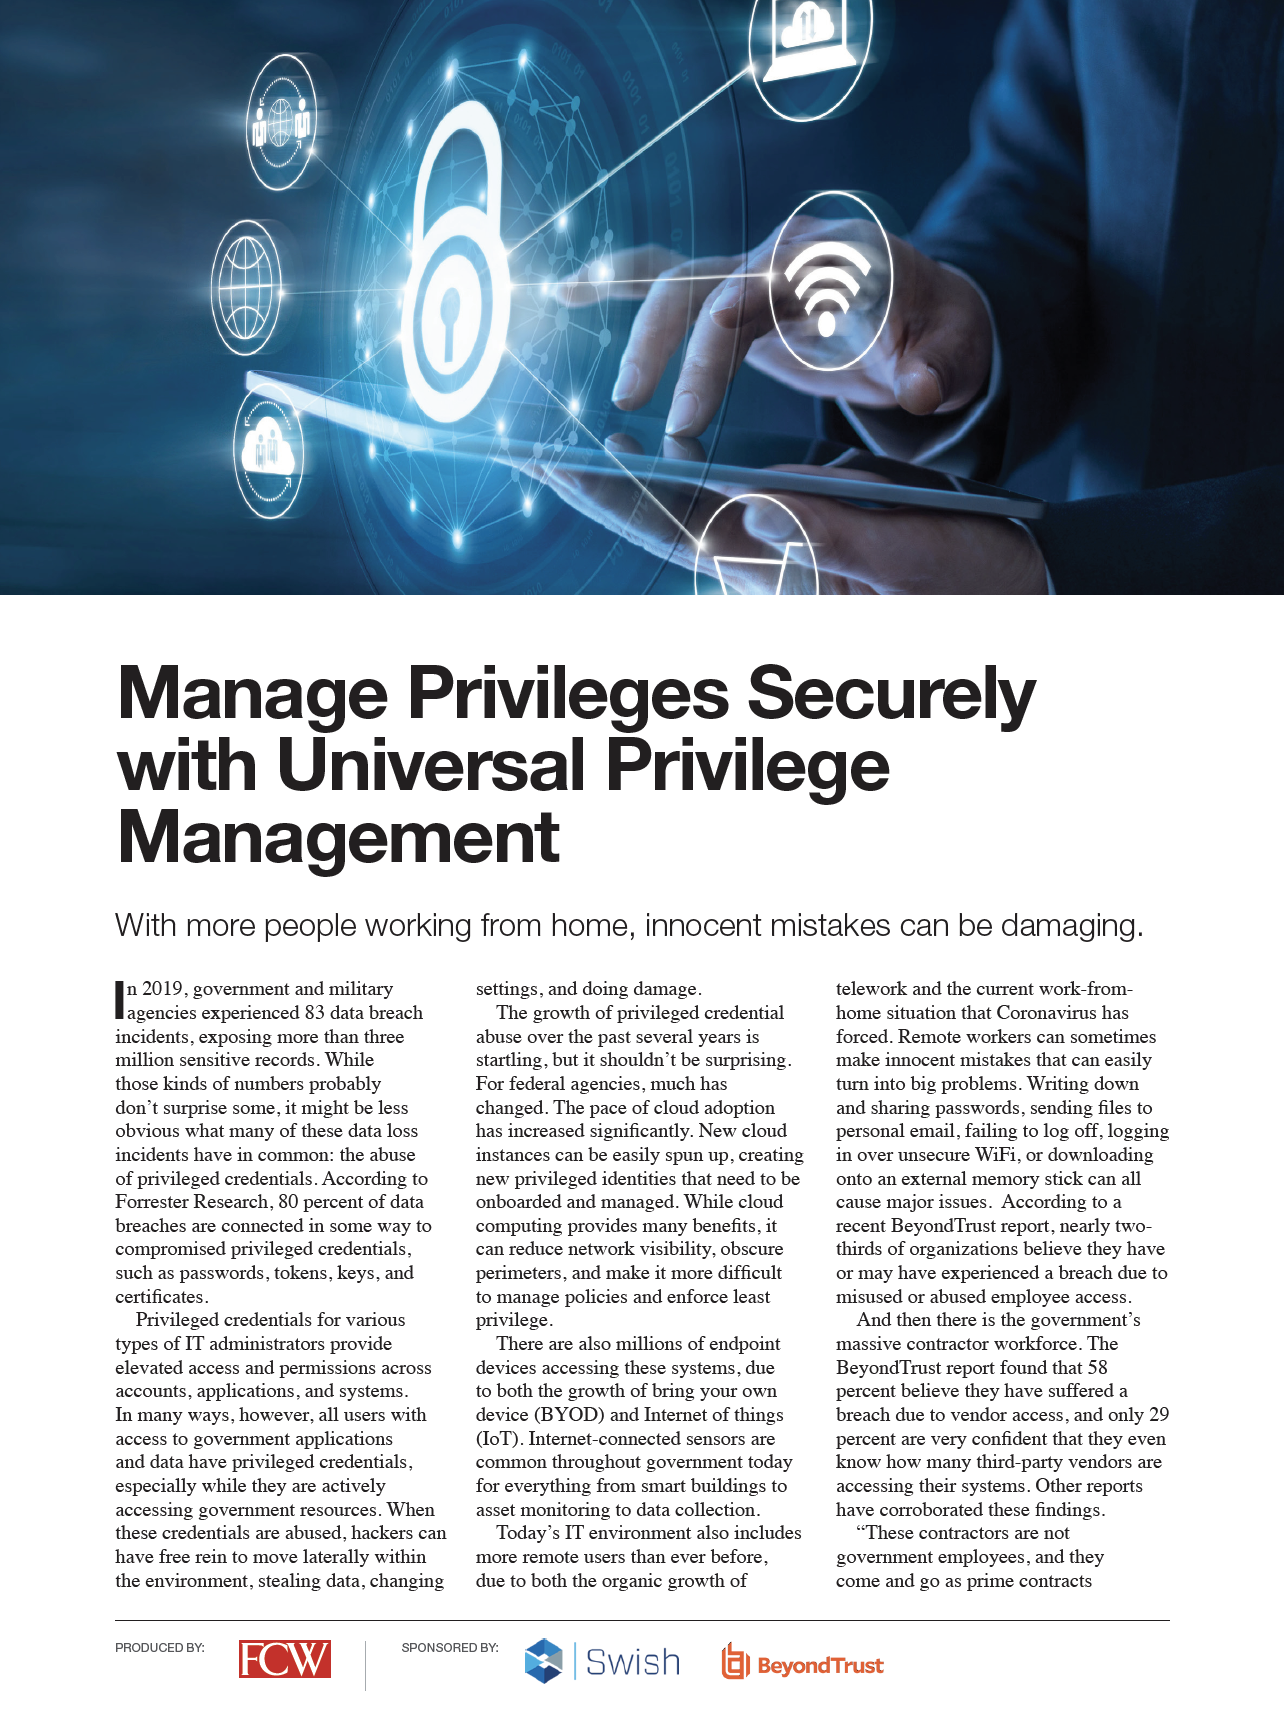 Universal Privilege Management pdf cover page